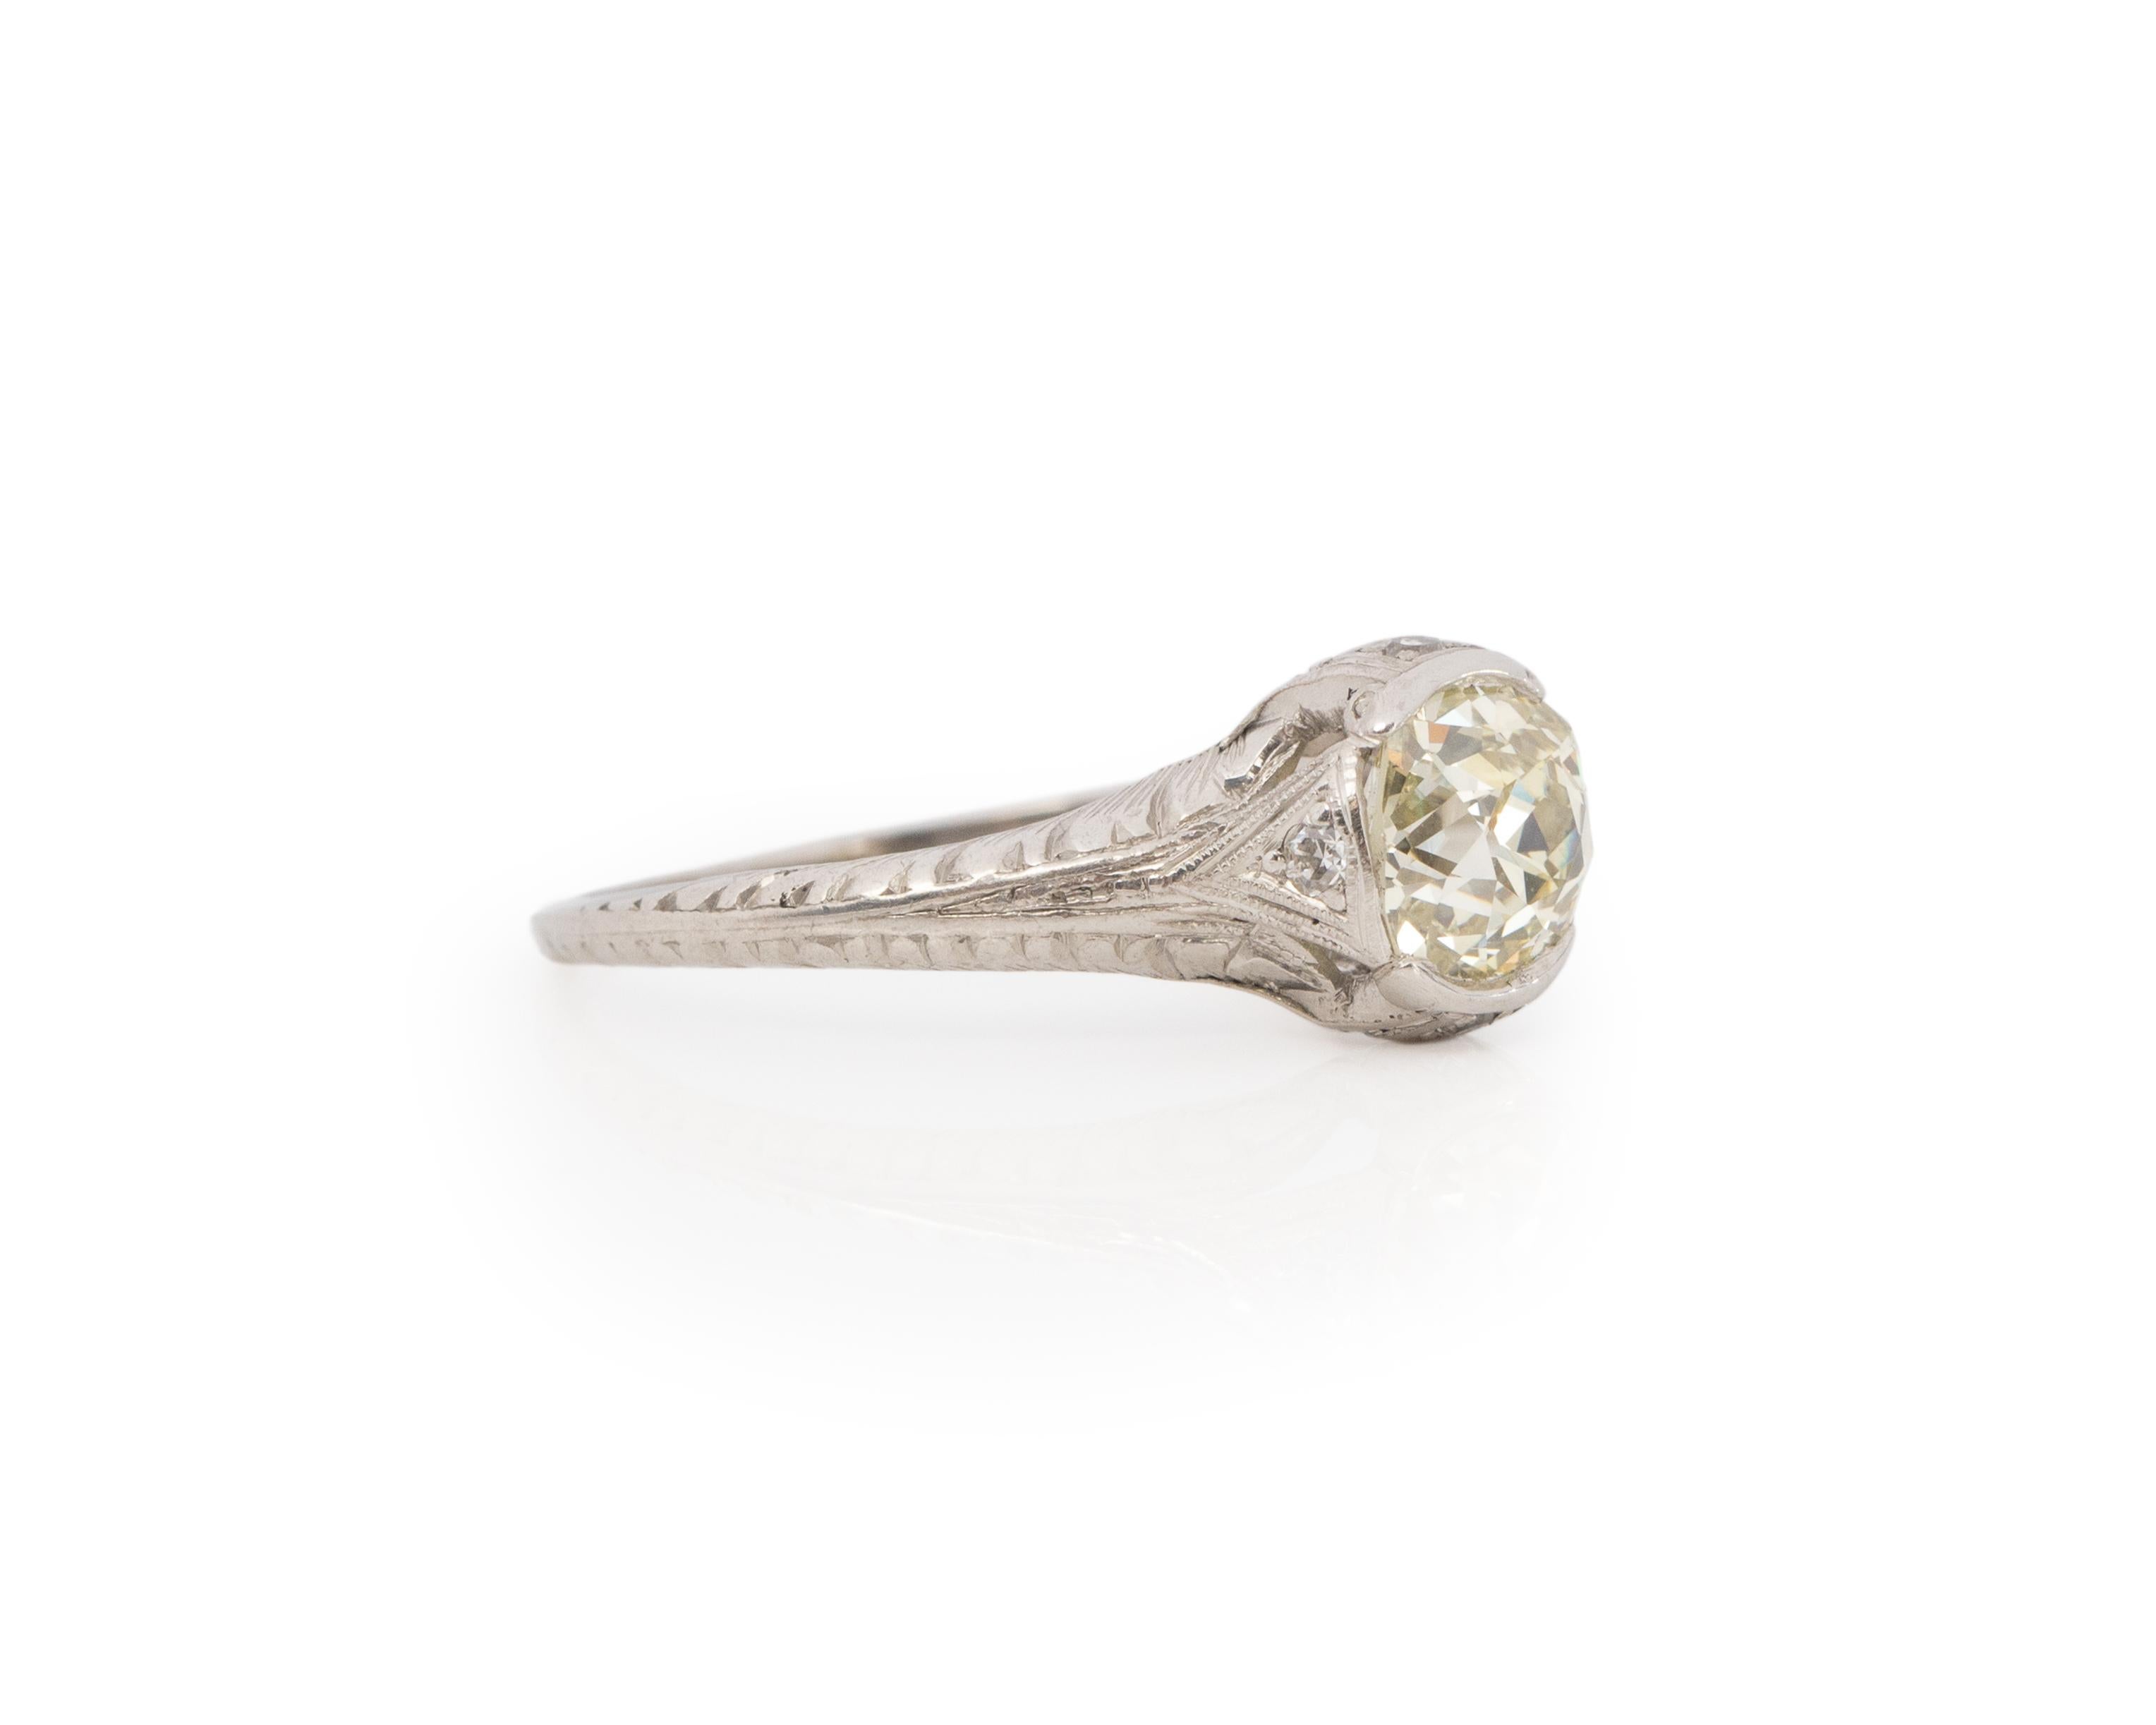 Ring Size: 7.1
Metal Type: Platinum [Hallmarked, and Tested]
Weight: 3.3grams

Center Diamond Details:
GIA LAB REPORT #:5222792073
Weight: 1.31ct
Cut: Old Mine Brilliant
Color: Light Yellow (U-V)
Clarity: VS2
Measurements: 6.69mm x 6.29mm x